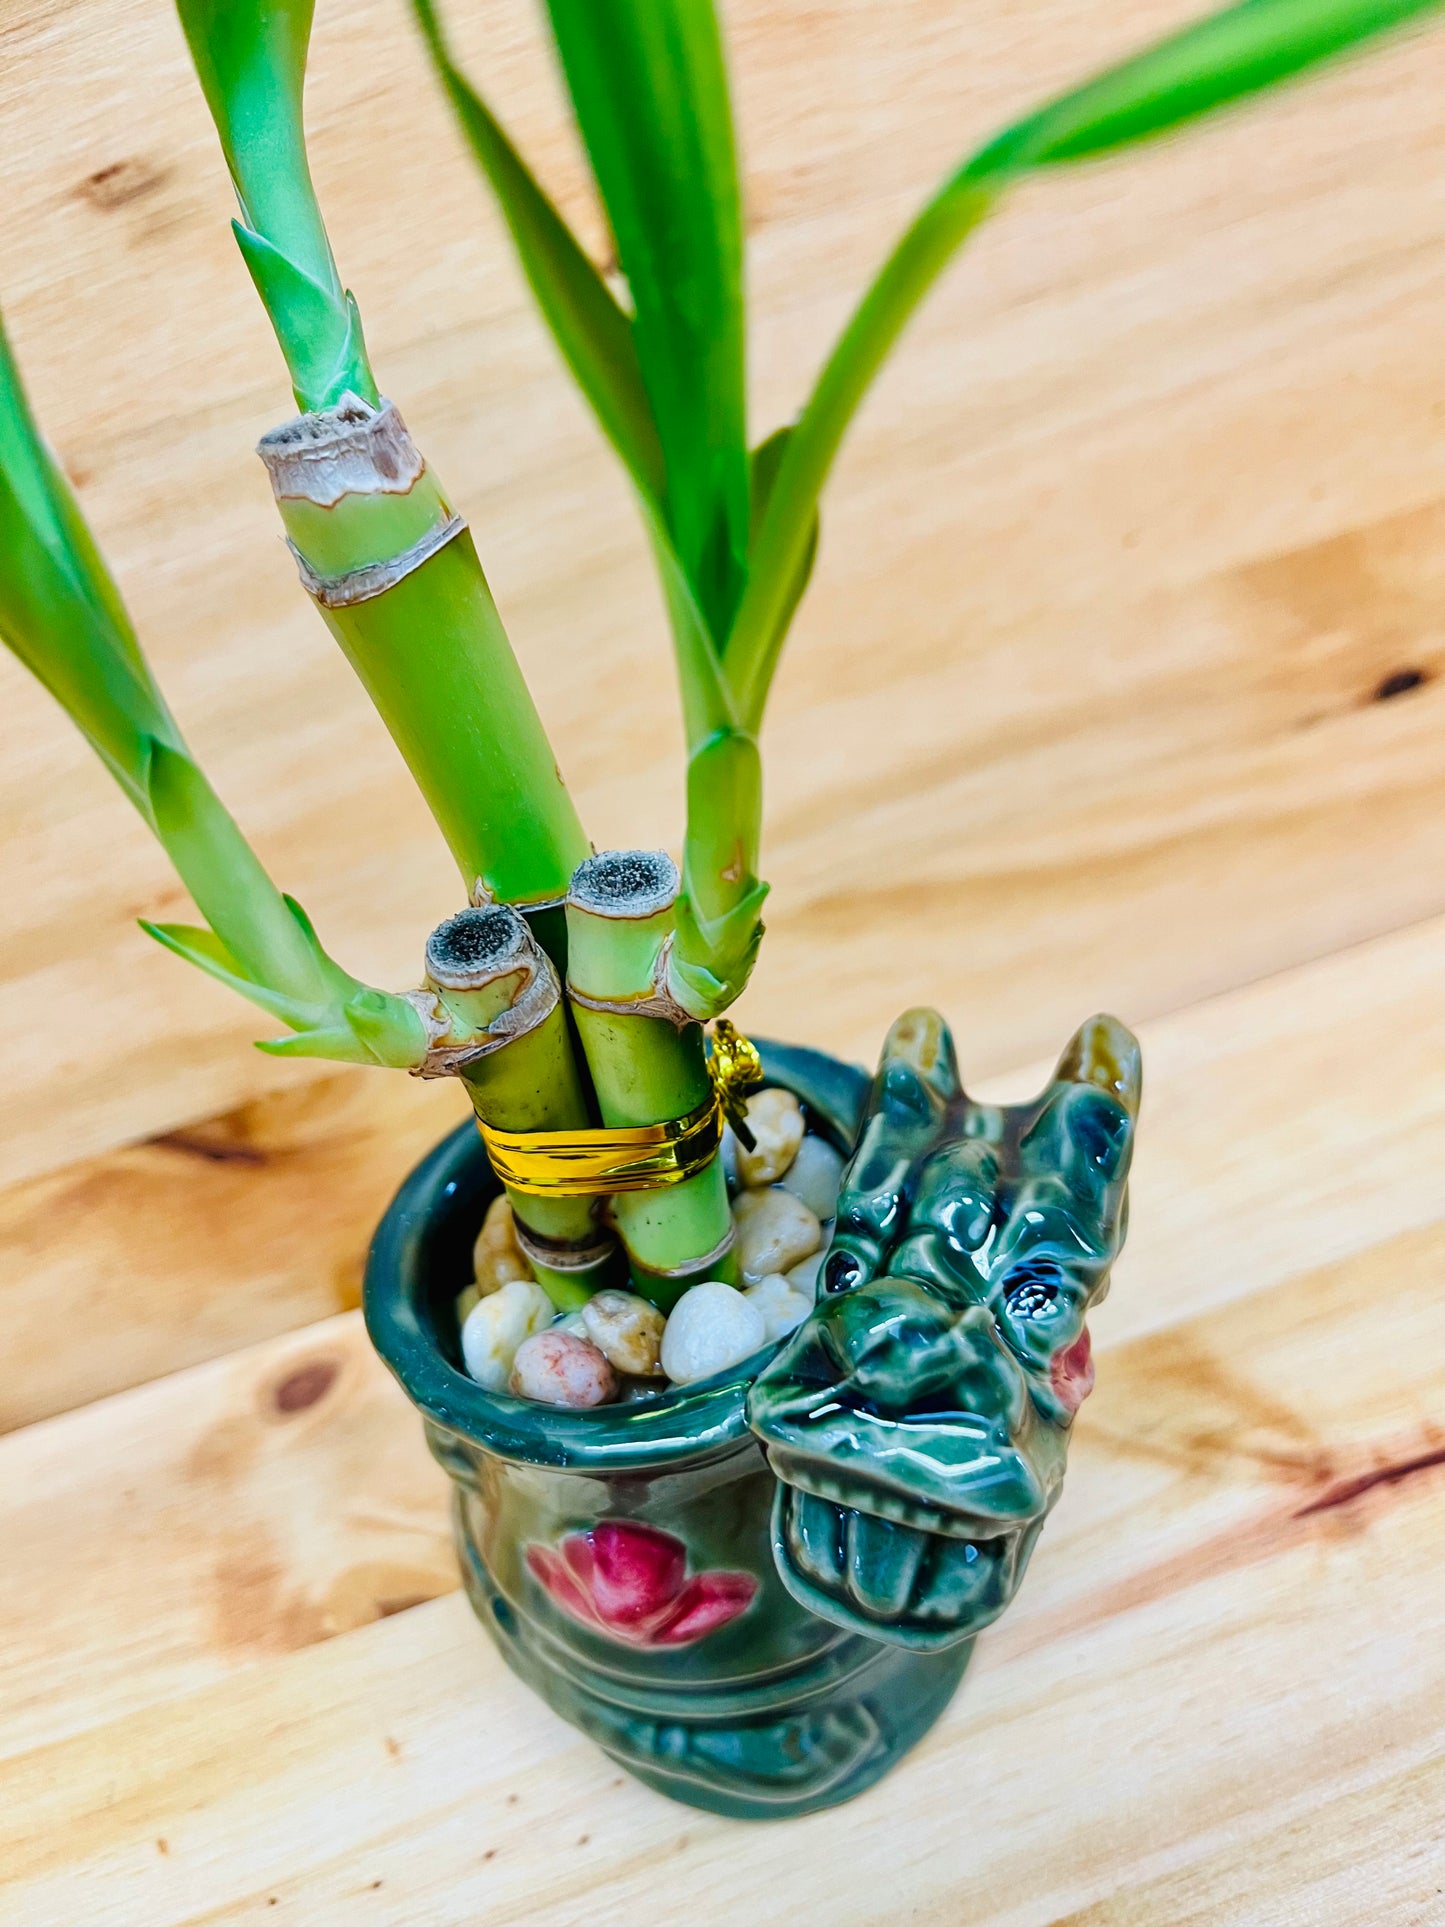 Live Lucky Bamboo 4”4”6” Year of the Dragon Ceramic Vase